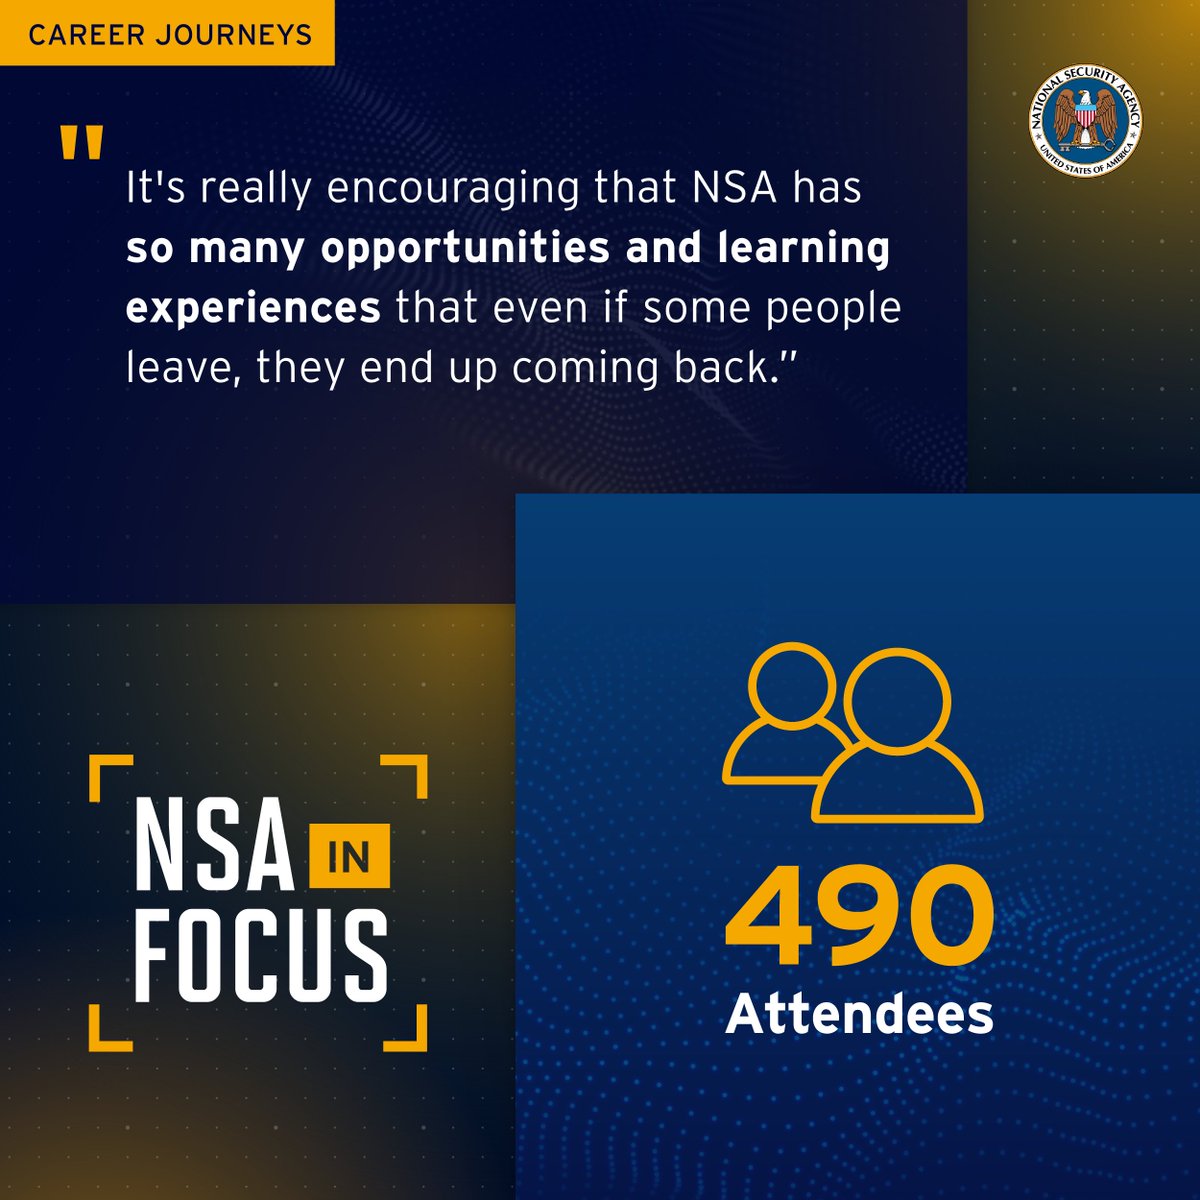 Earlier this month, we hosted our NSA in Focus event focused on career journeys at the agency. In case you missed it, here is the full recording: bit.ly/43cUWh8. #nsainfocus #careerjourney